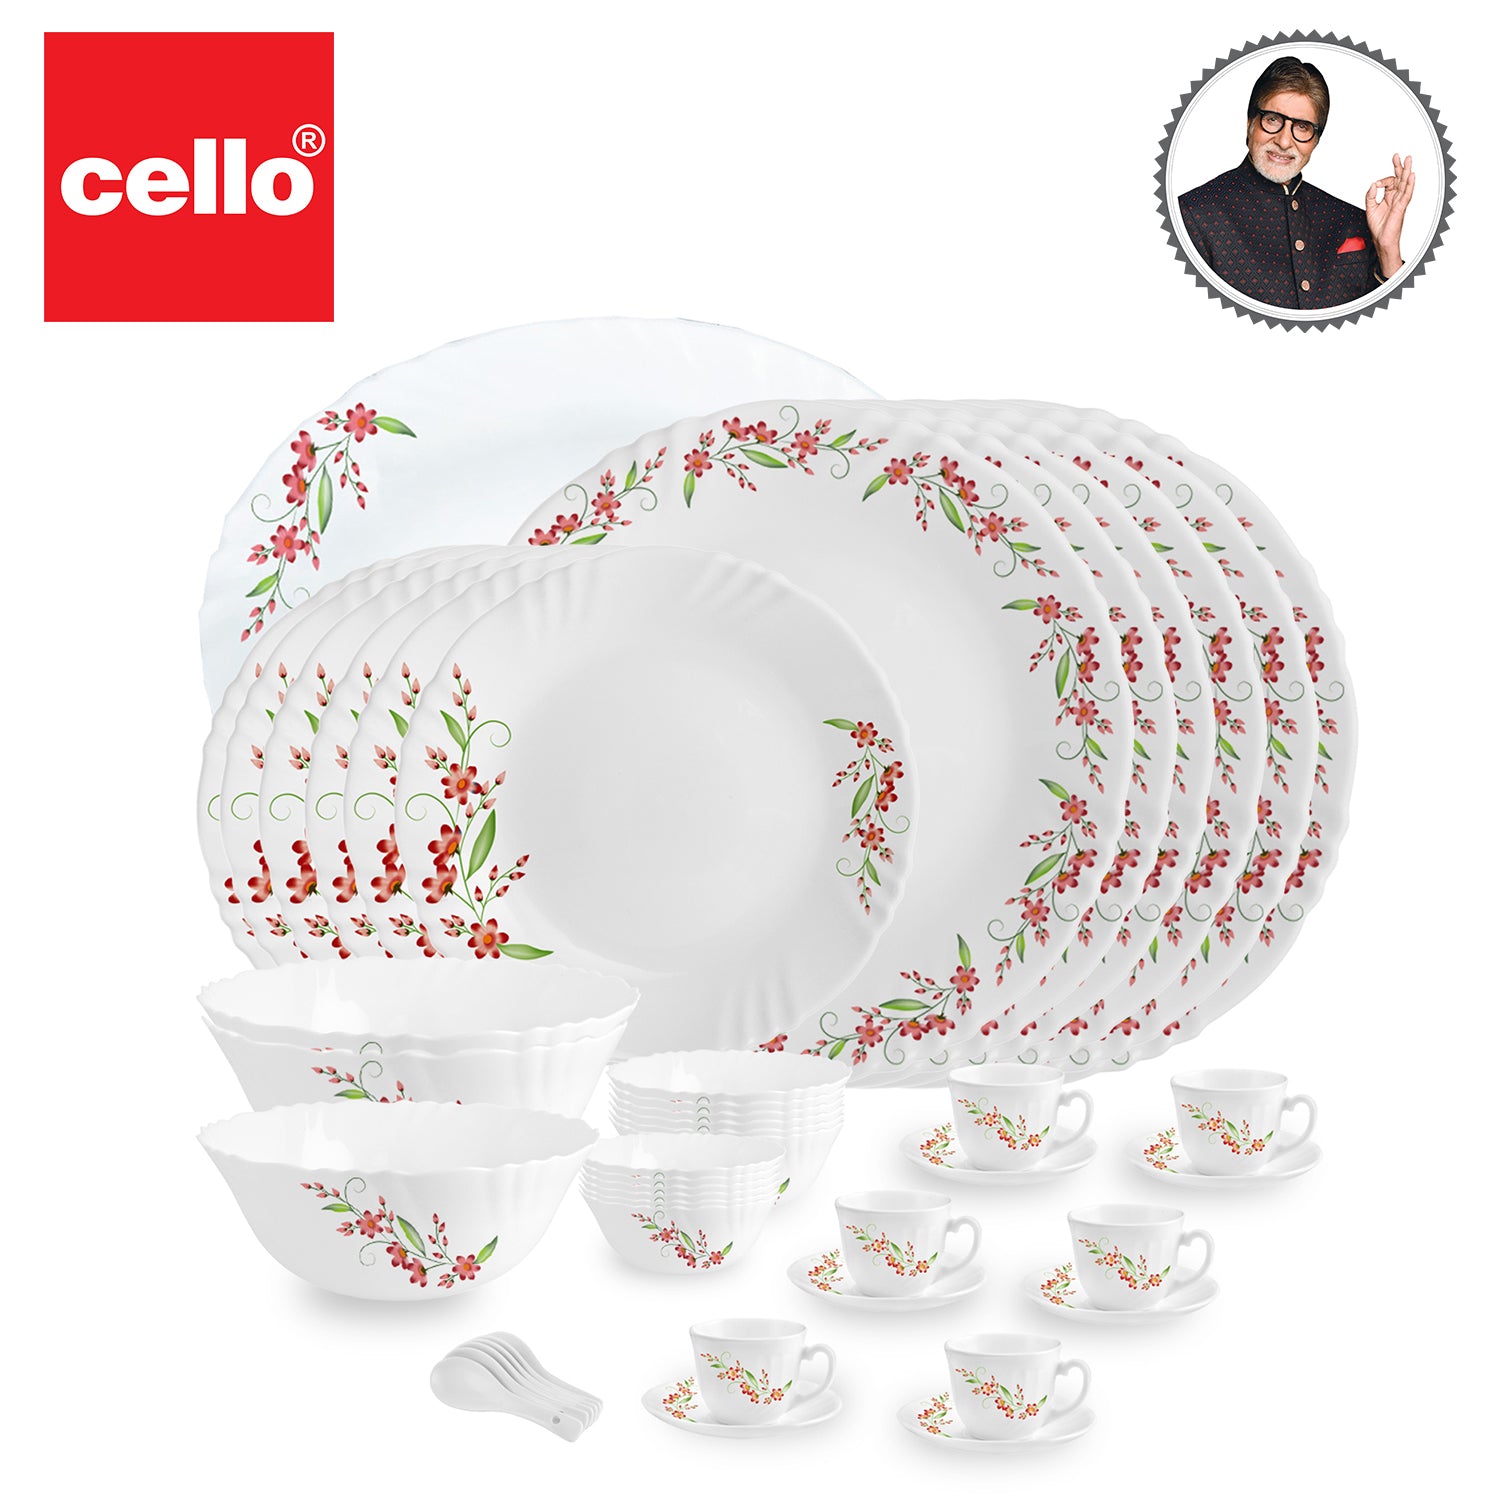 Imperial Series 46 Pieces Opalware Dinner Set for Family of 6 Cello Creeper